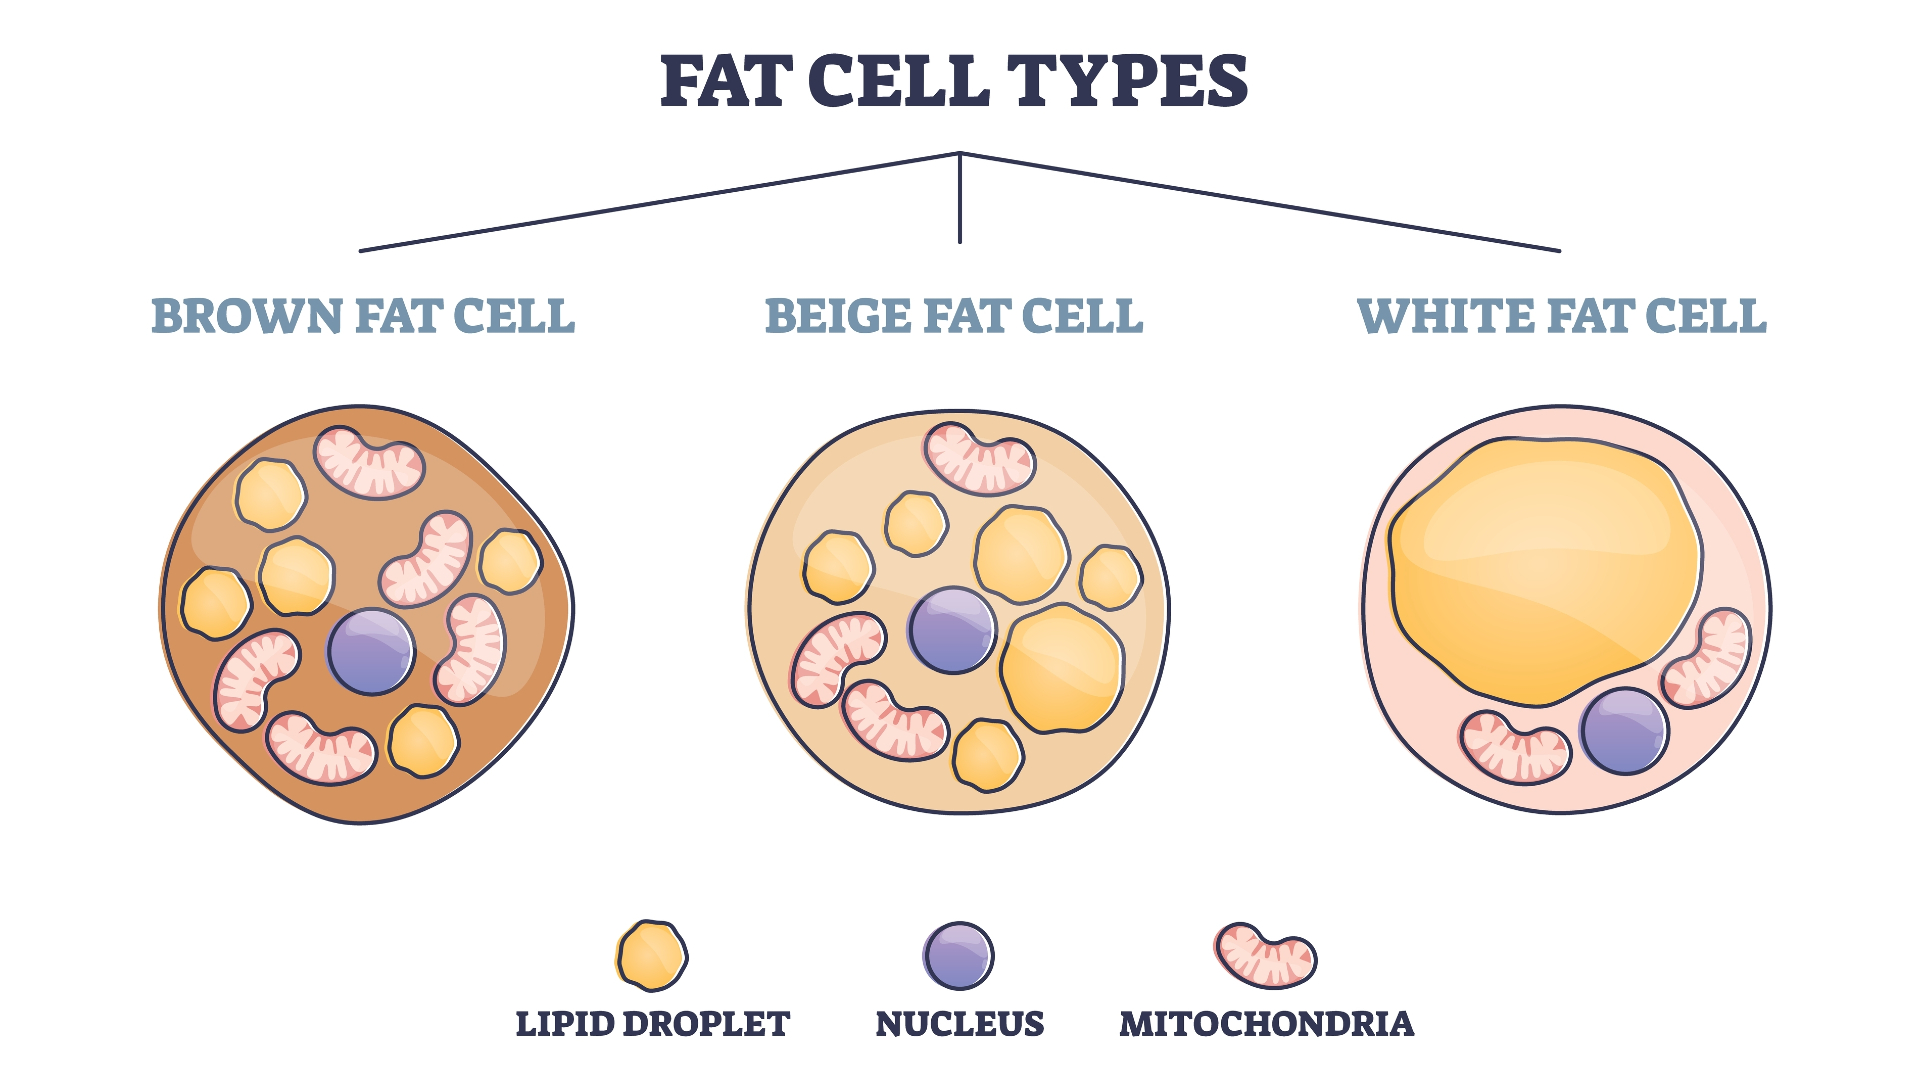 Illustration showing three different fat cell types: brown, beige, and white.